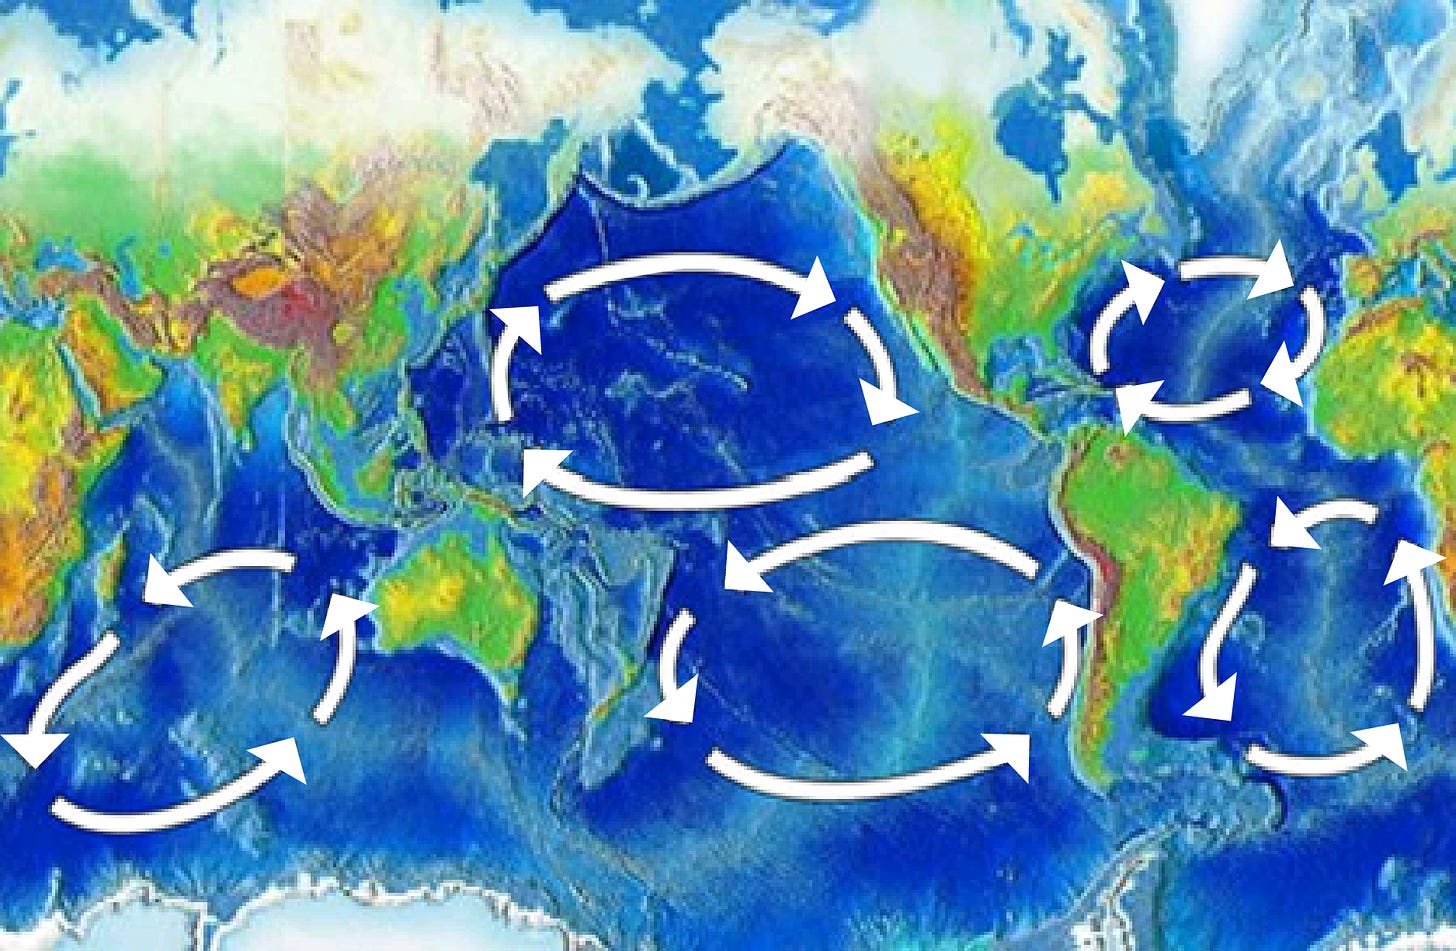 https://upload.wikimedia.org/wikipedia/commons/8/8a/Oceanic_gyres.png